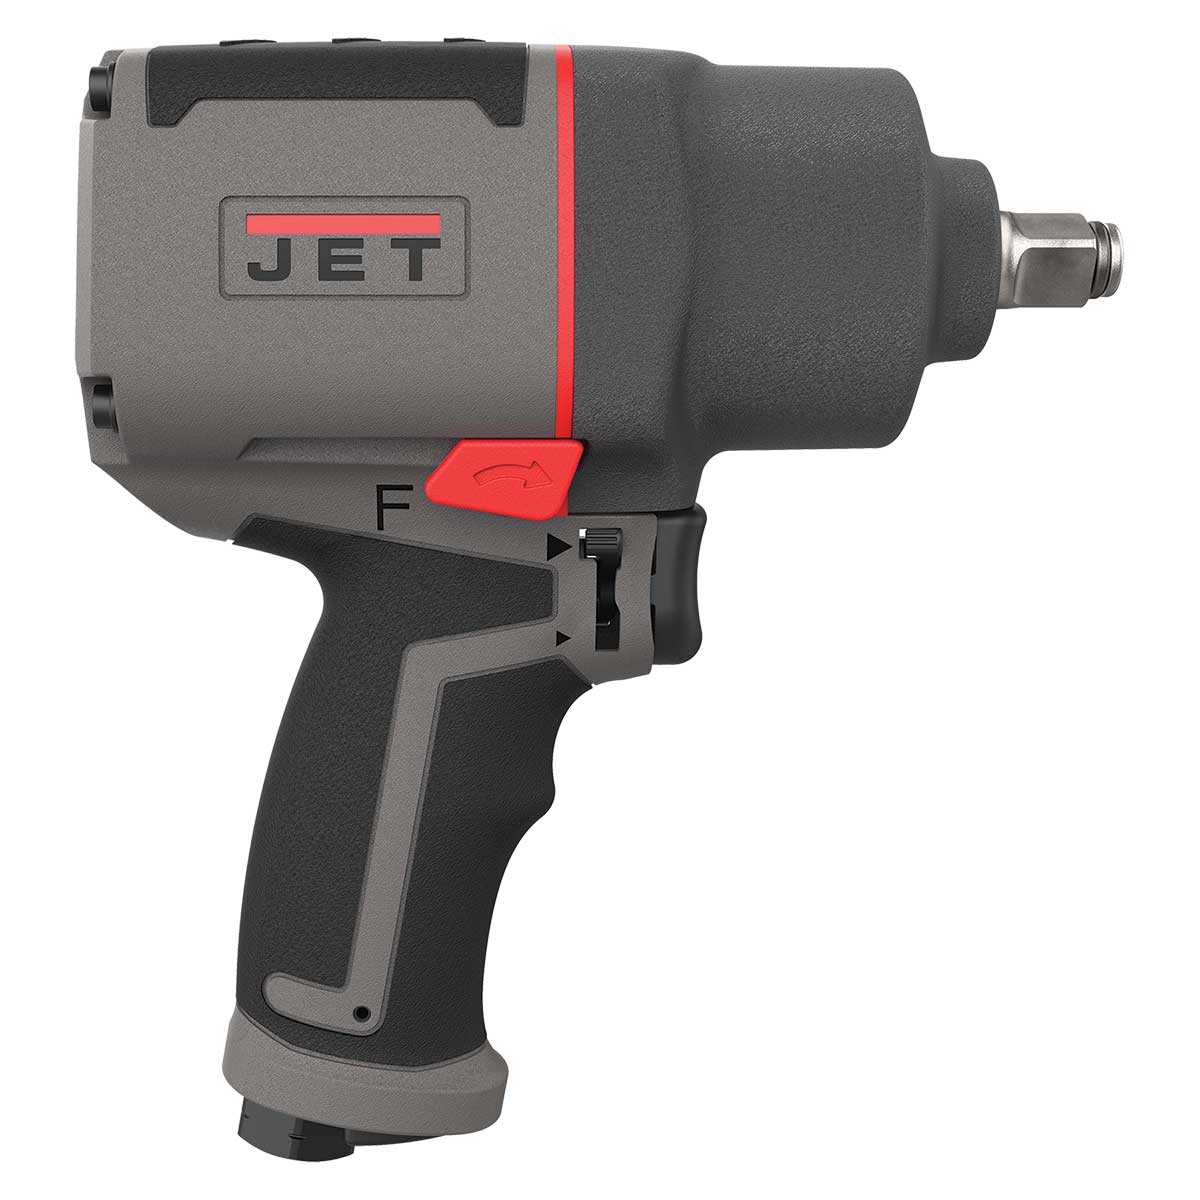 JET 1/2" Composite Air Impact Wrench